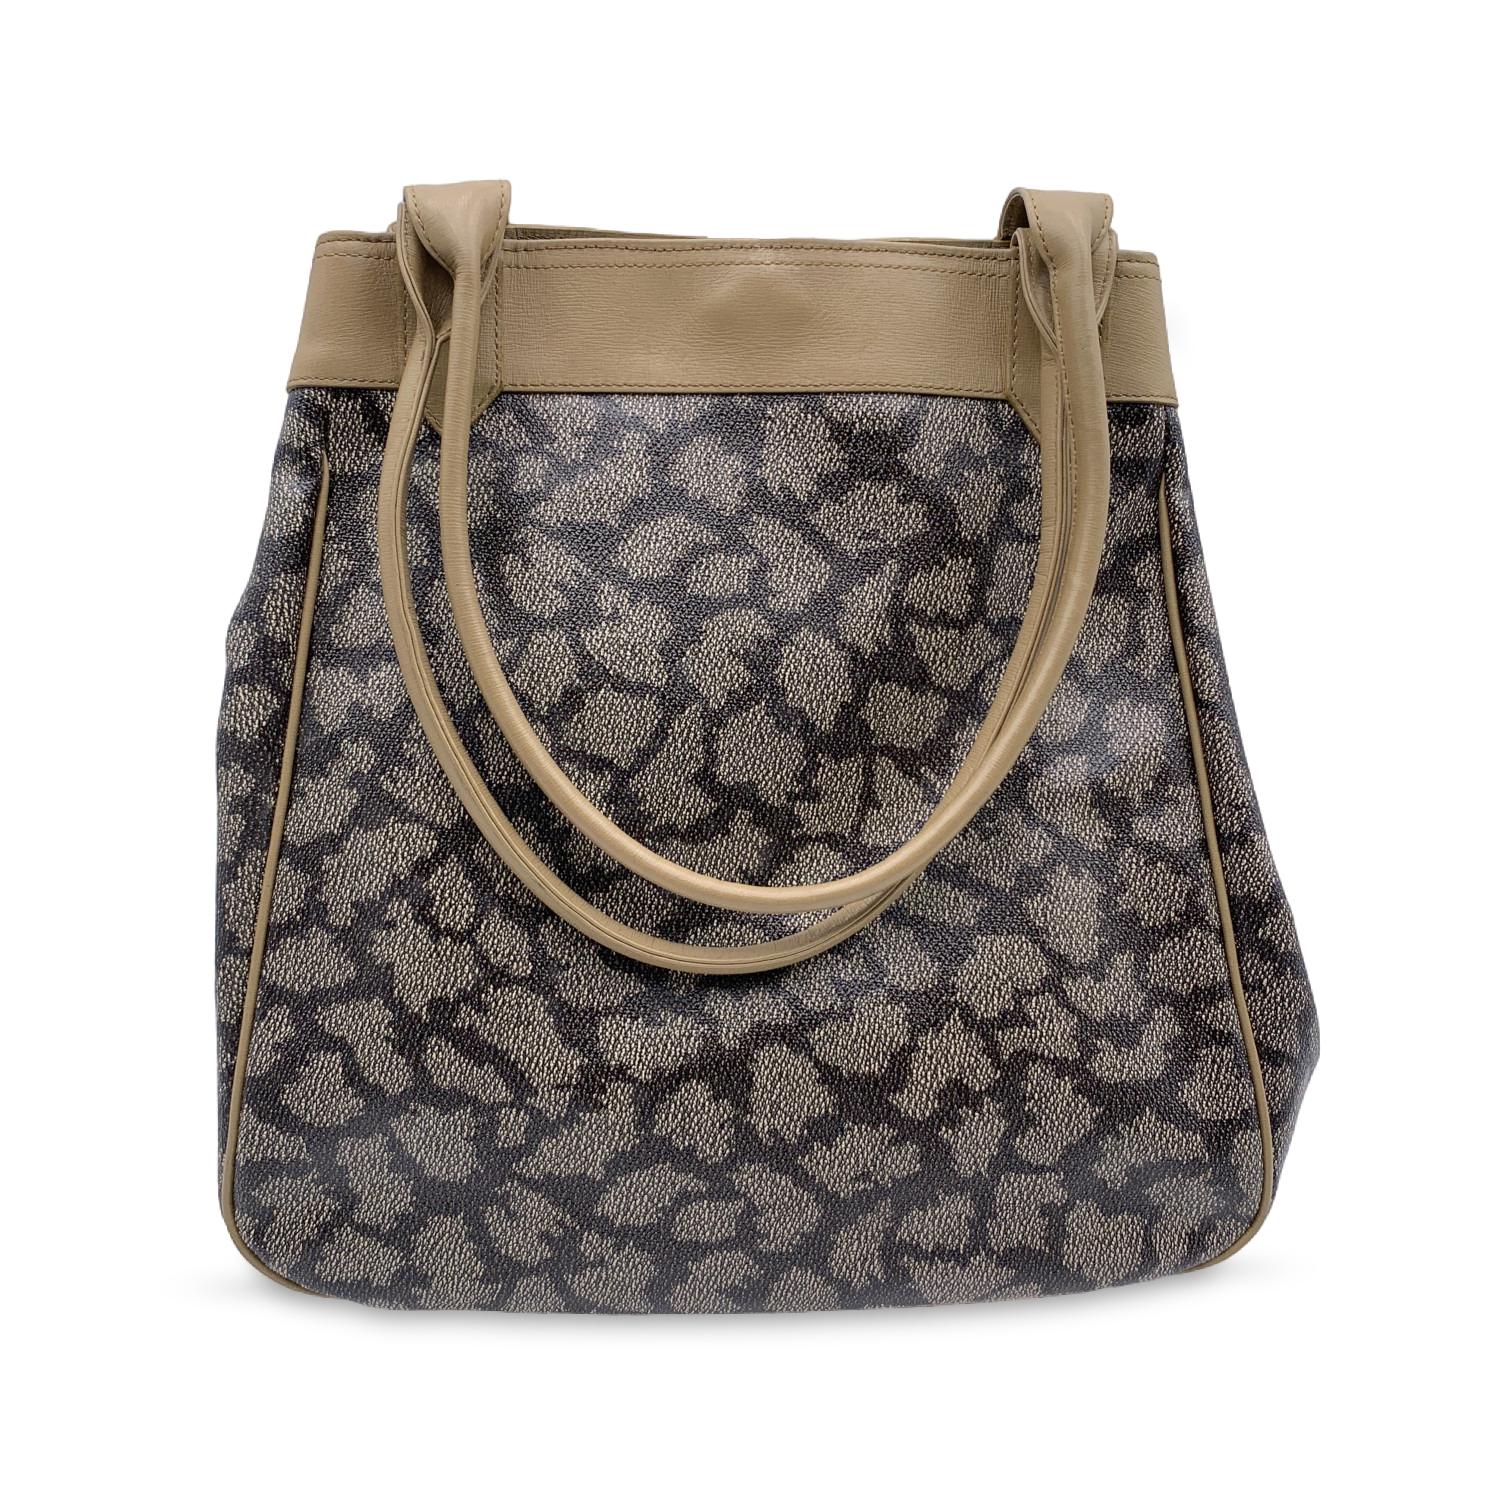 Yves Saint Laurent Vintage Giraffe Print Canvas Tote Shoulder Bag In Excellent Condition In Rome, Rome